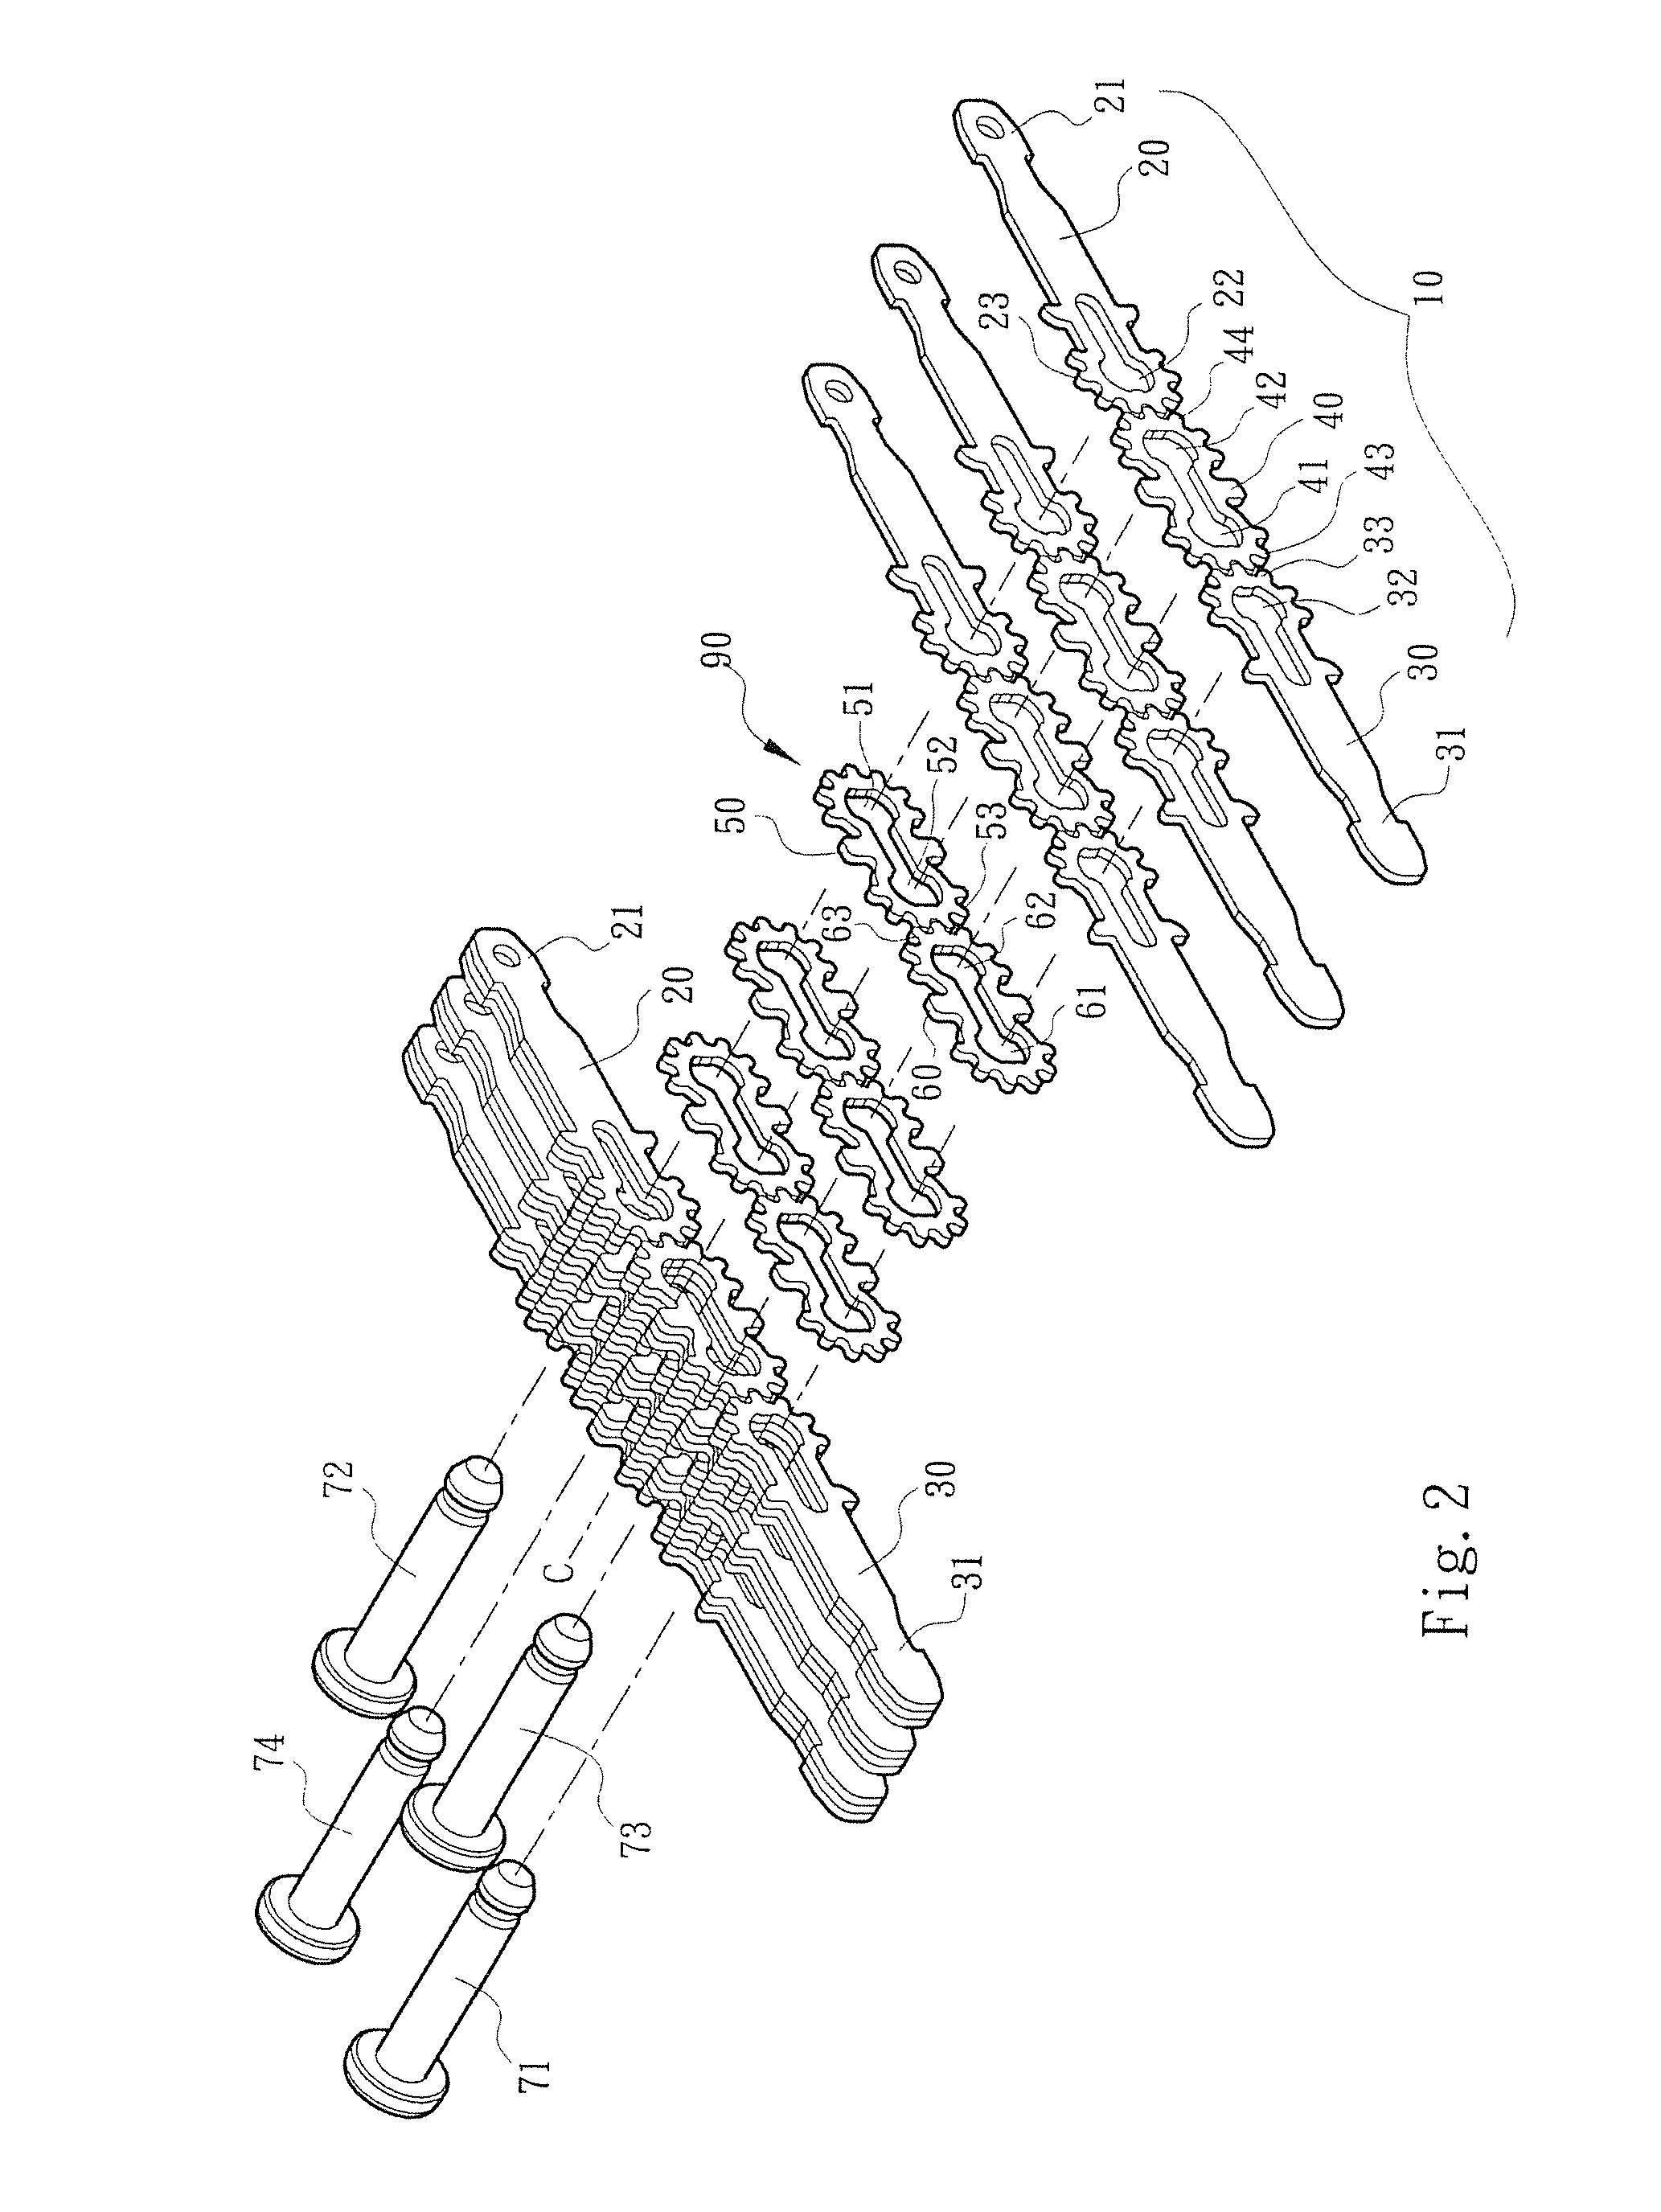 Plug-in connection multi-segment rotary shaft structure